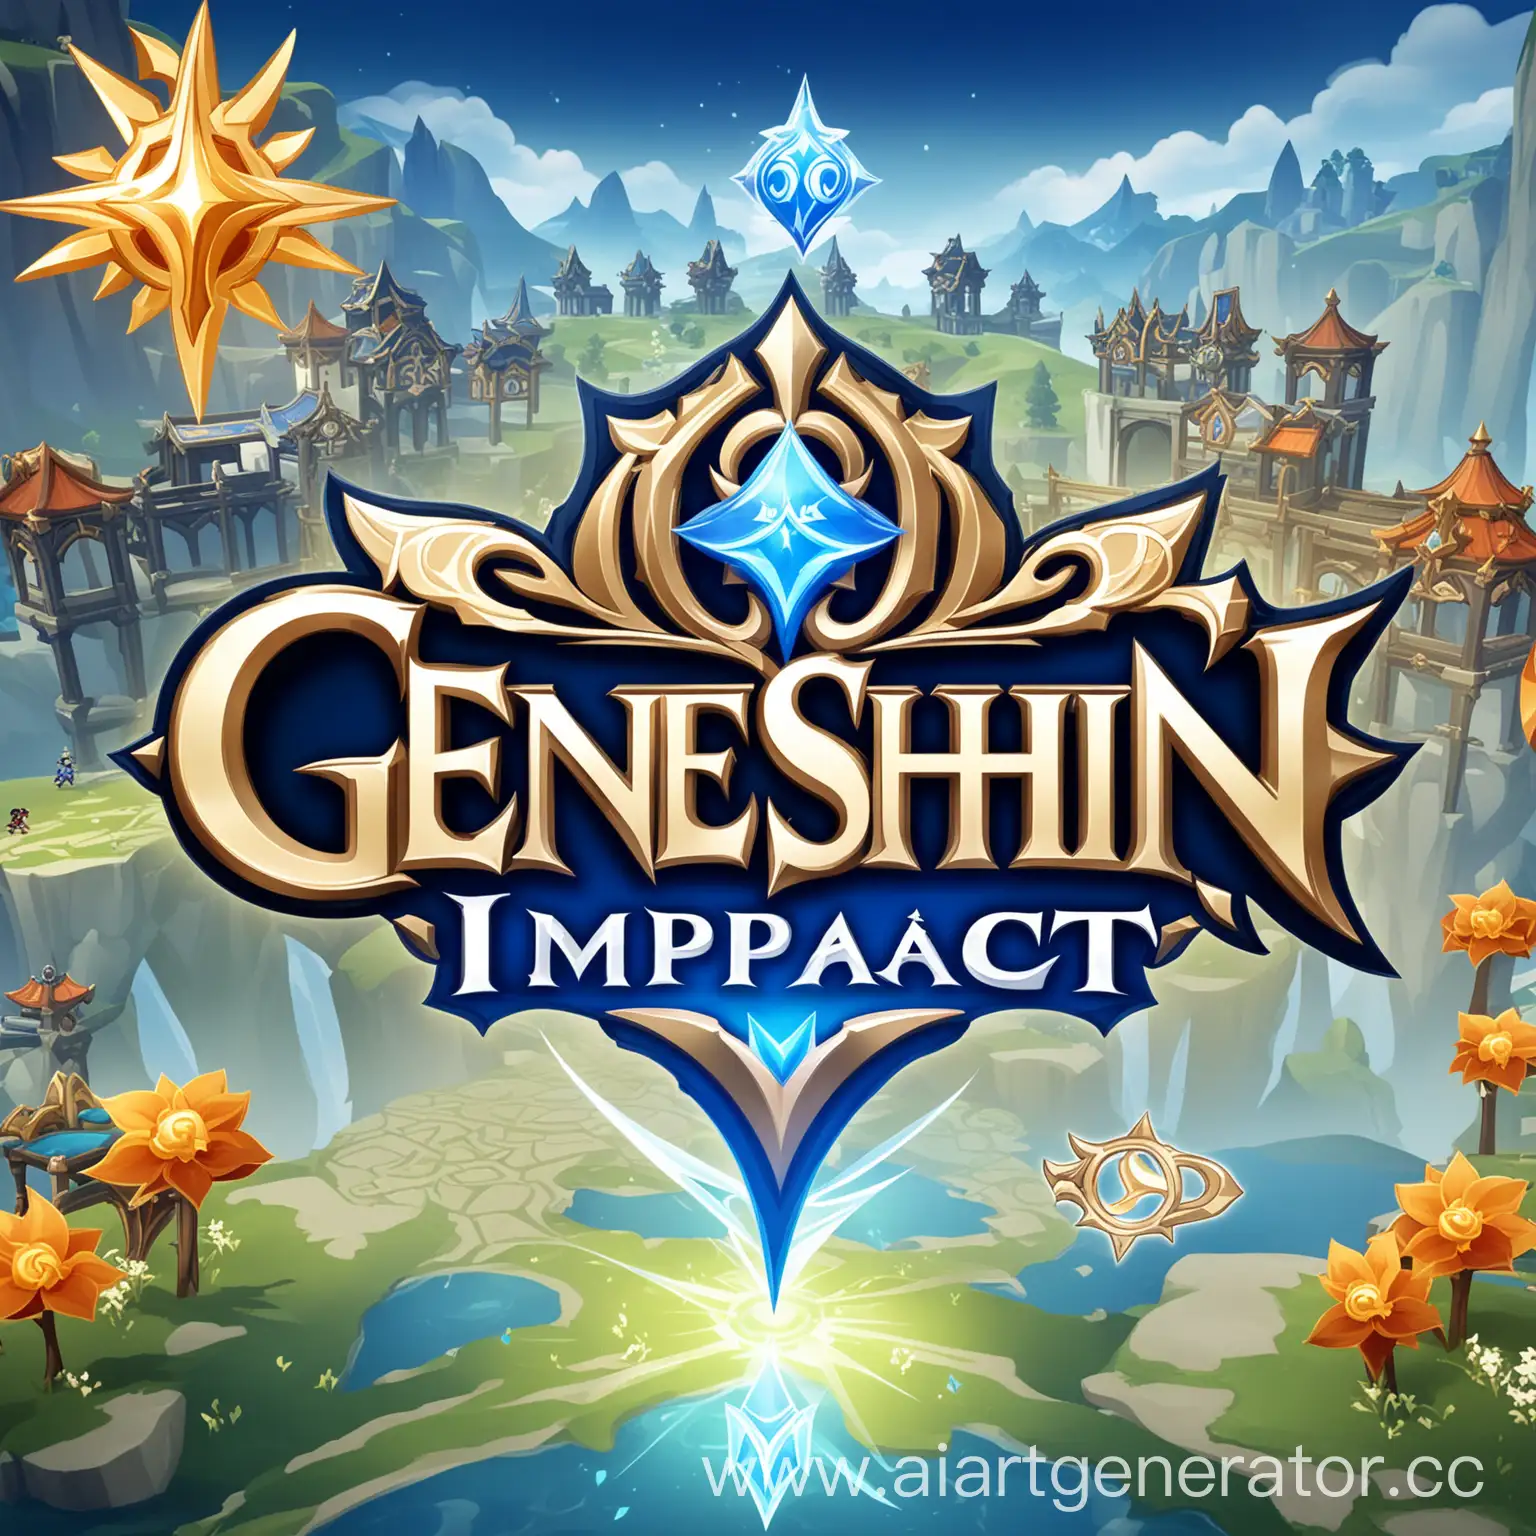 Colorful-Logotype-of-Genshin-Impact-Game-Characters-and-Symbols